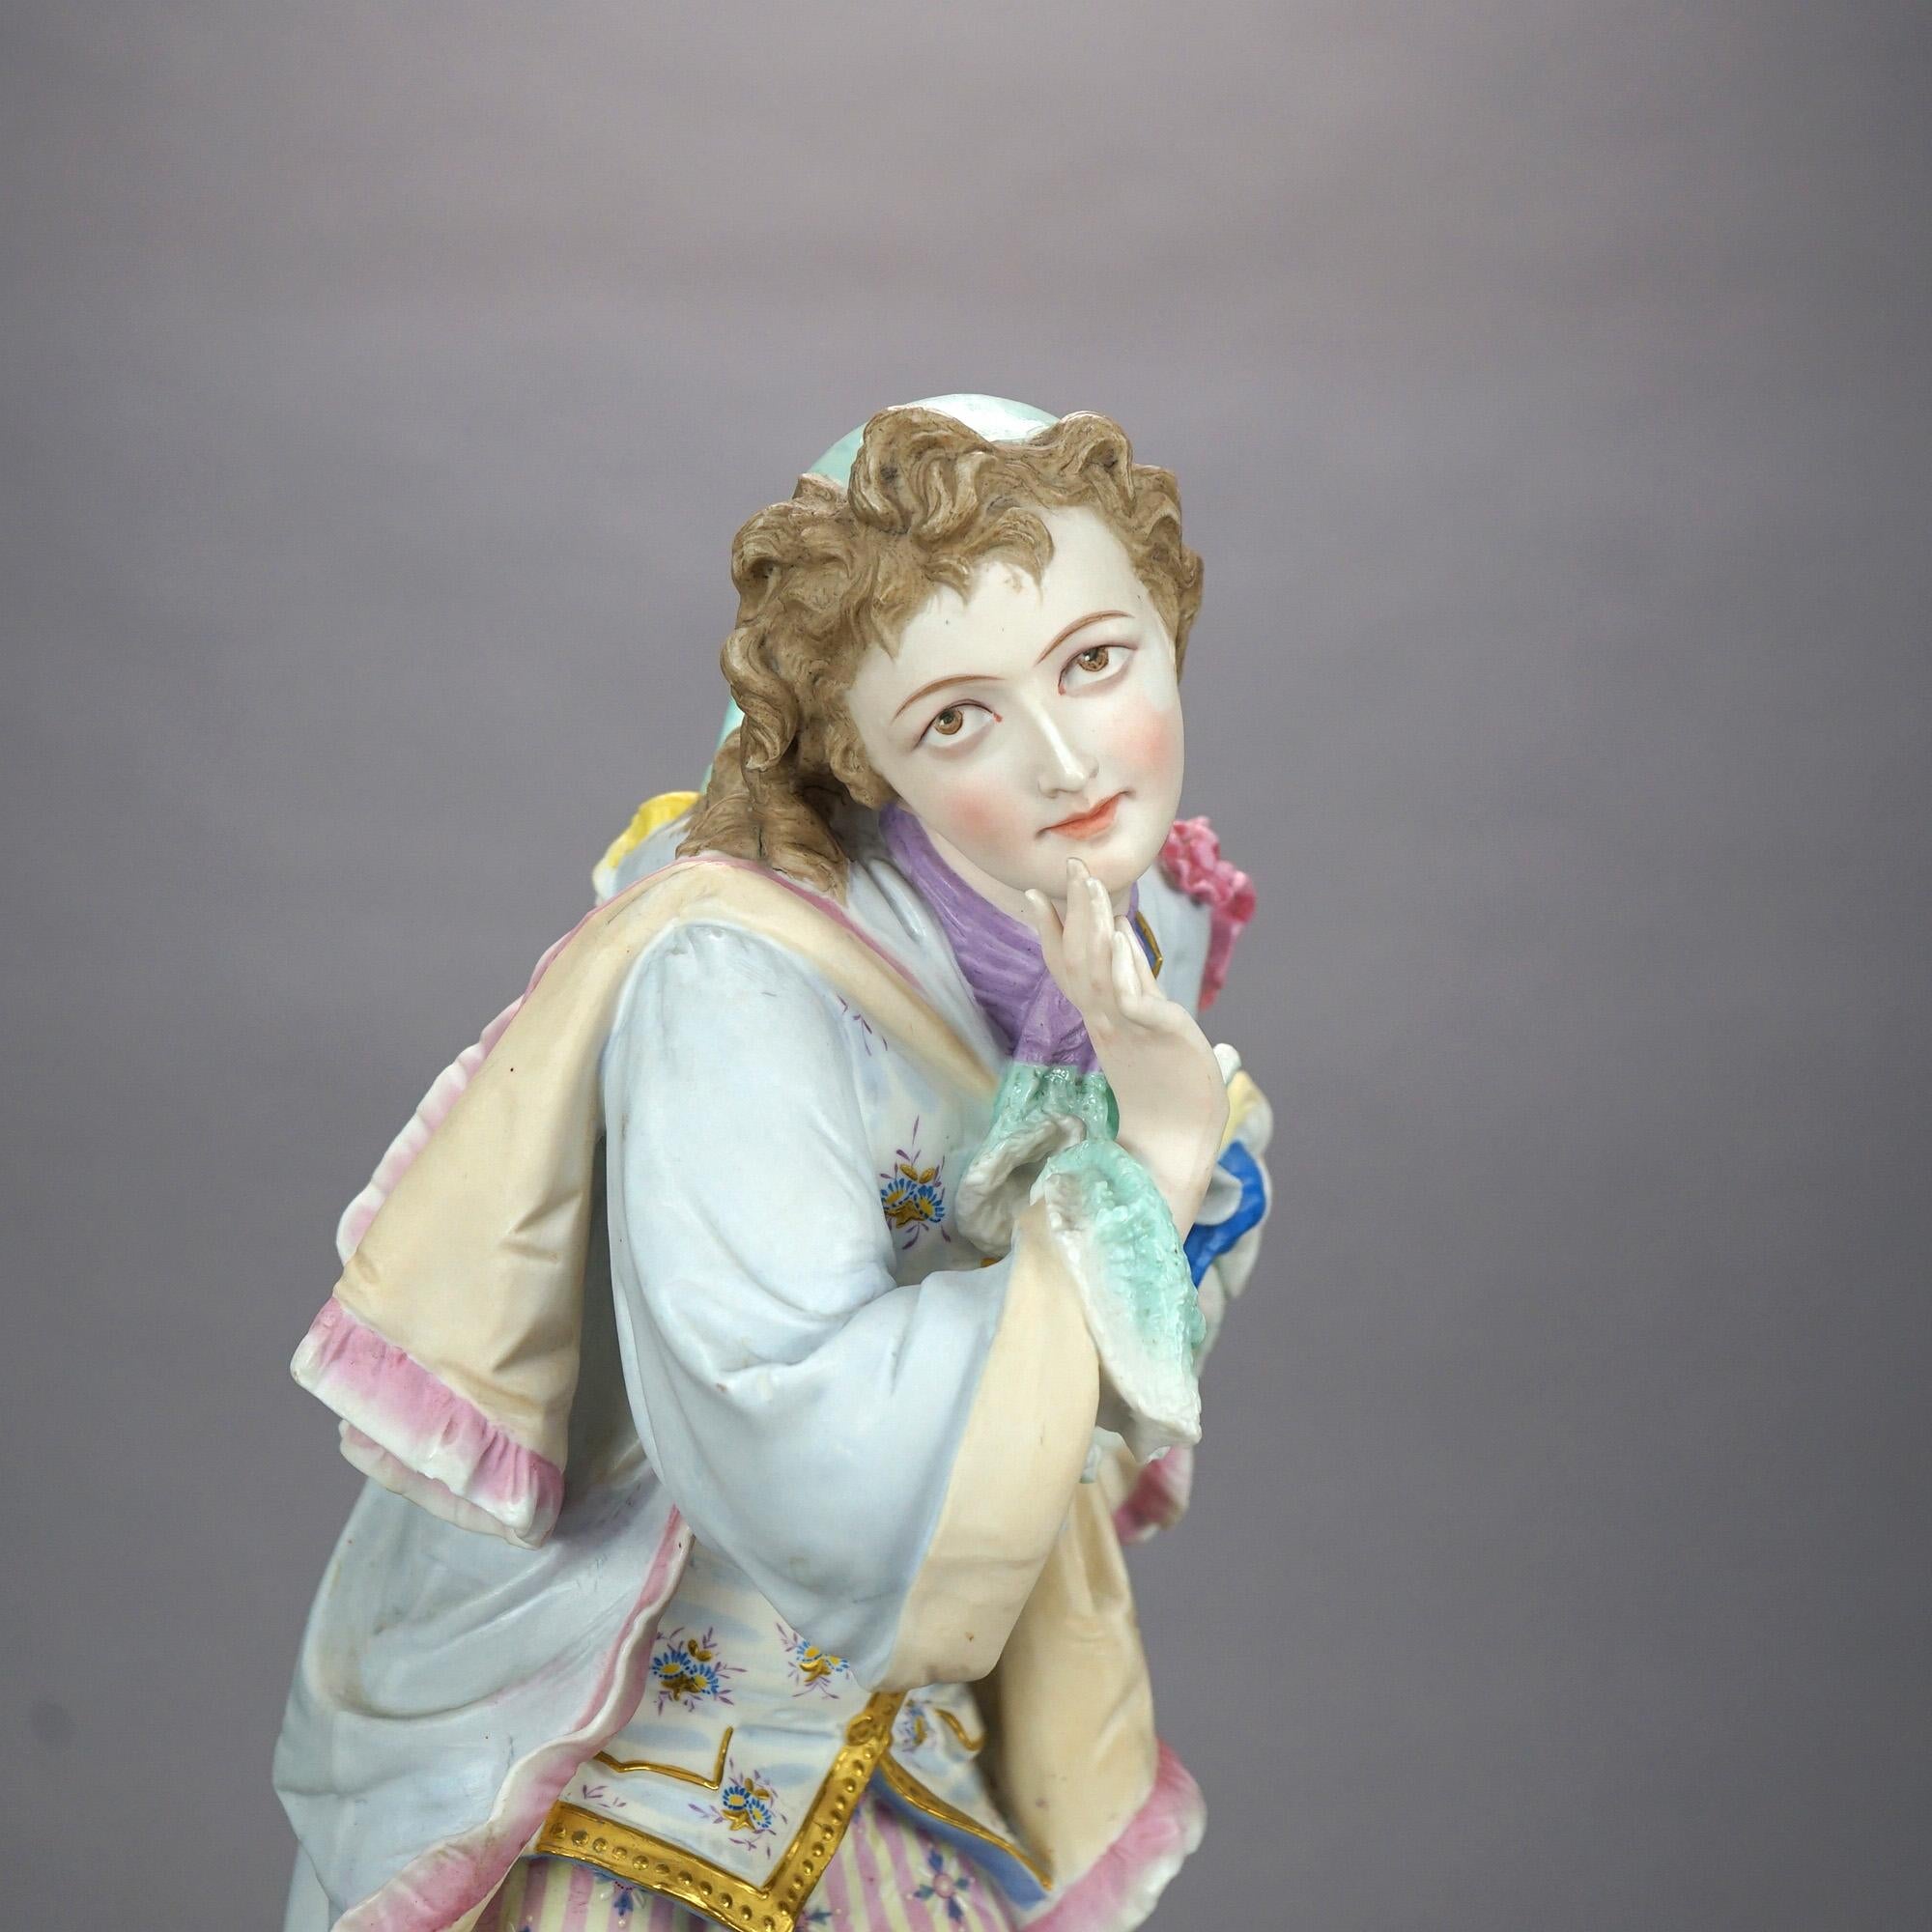 English Antique Oversized Chelsea or Vion Bisque Porcelain Figure of a Young Man, 19th C